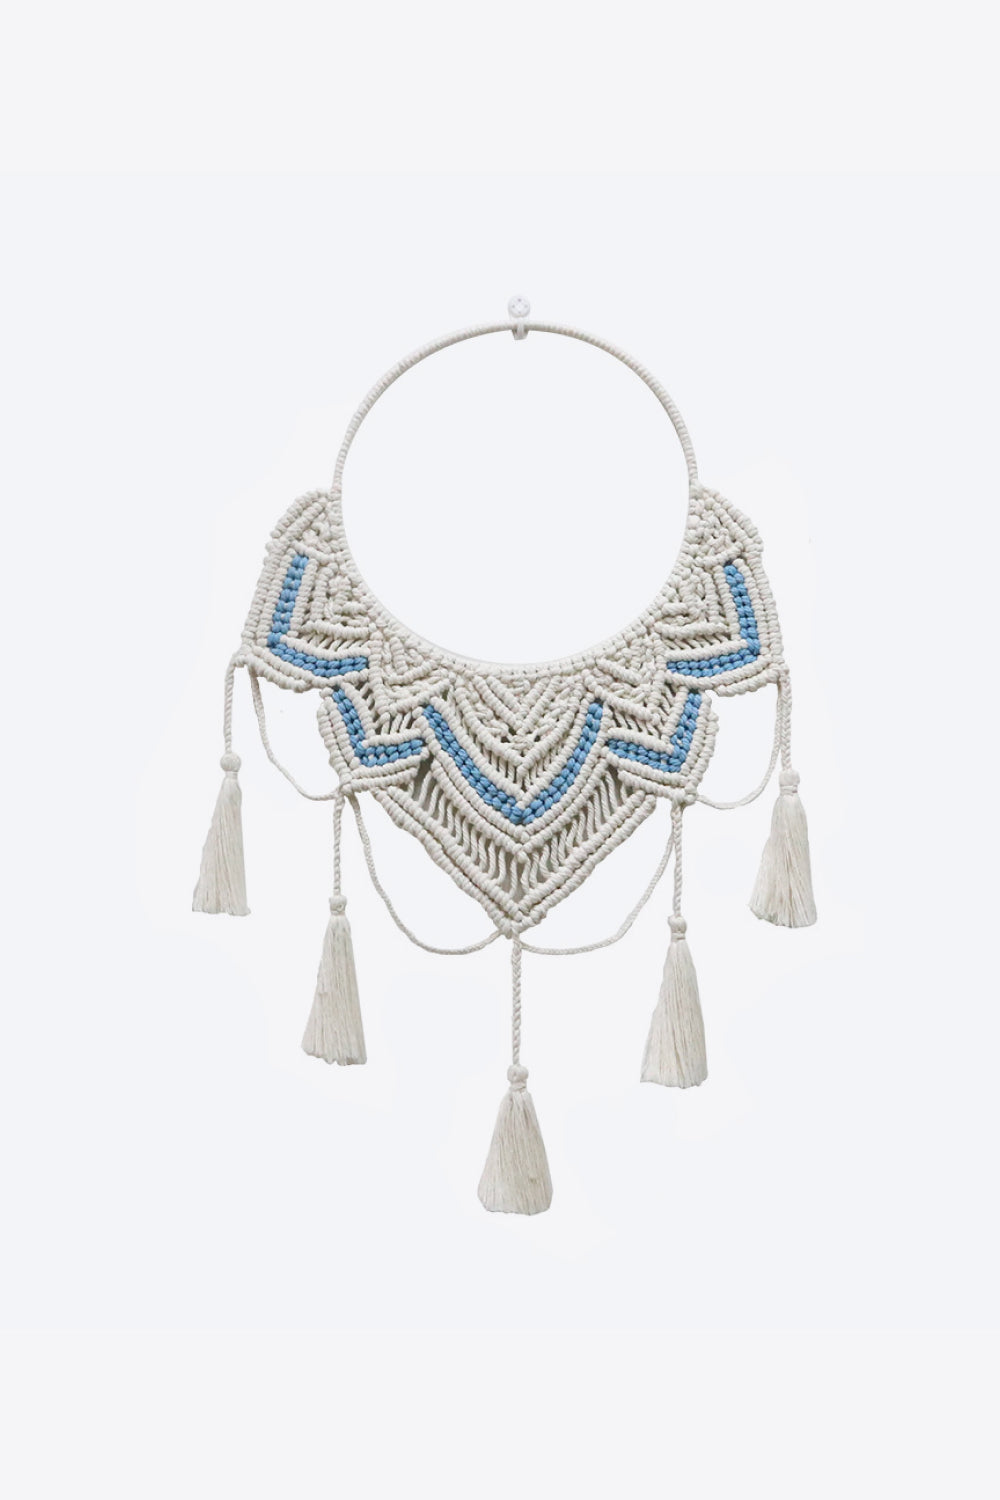 Macrame Wall Hanging with Tassel - AllIn Computer